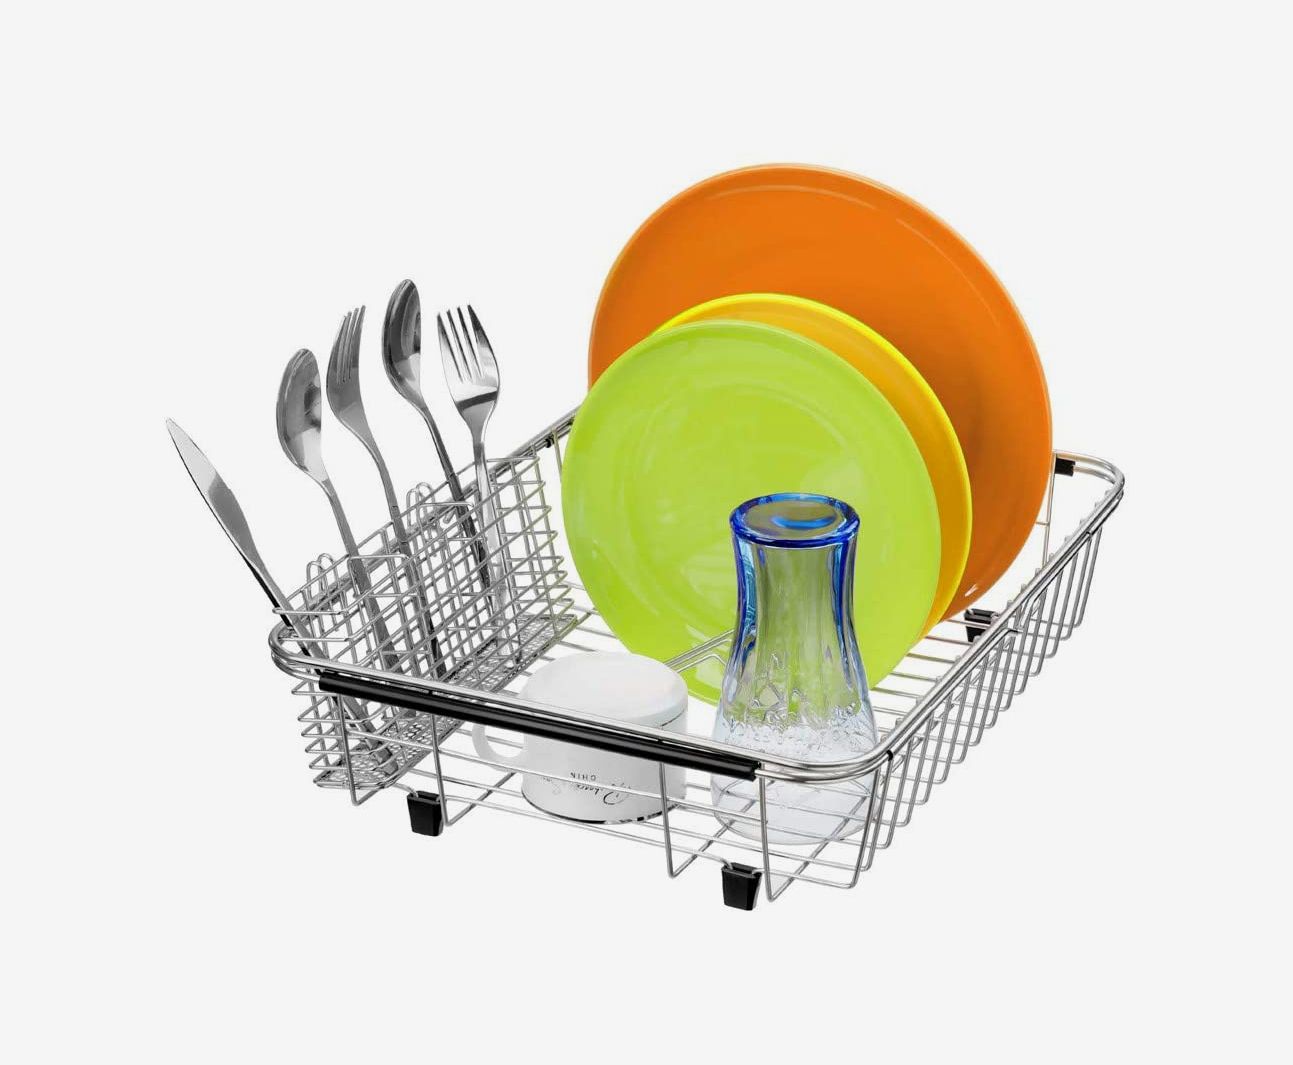 sanno stainless steel dish drying rack